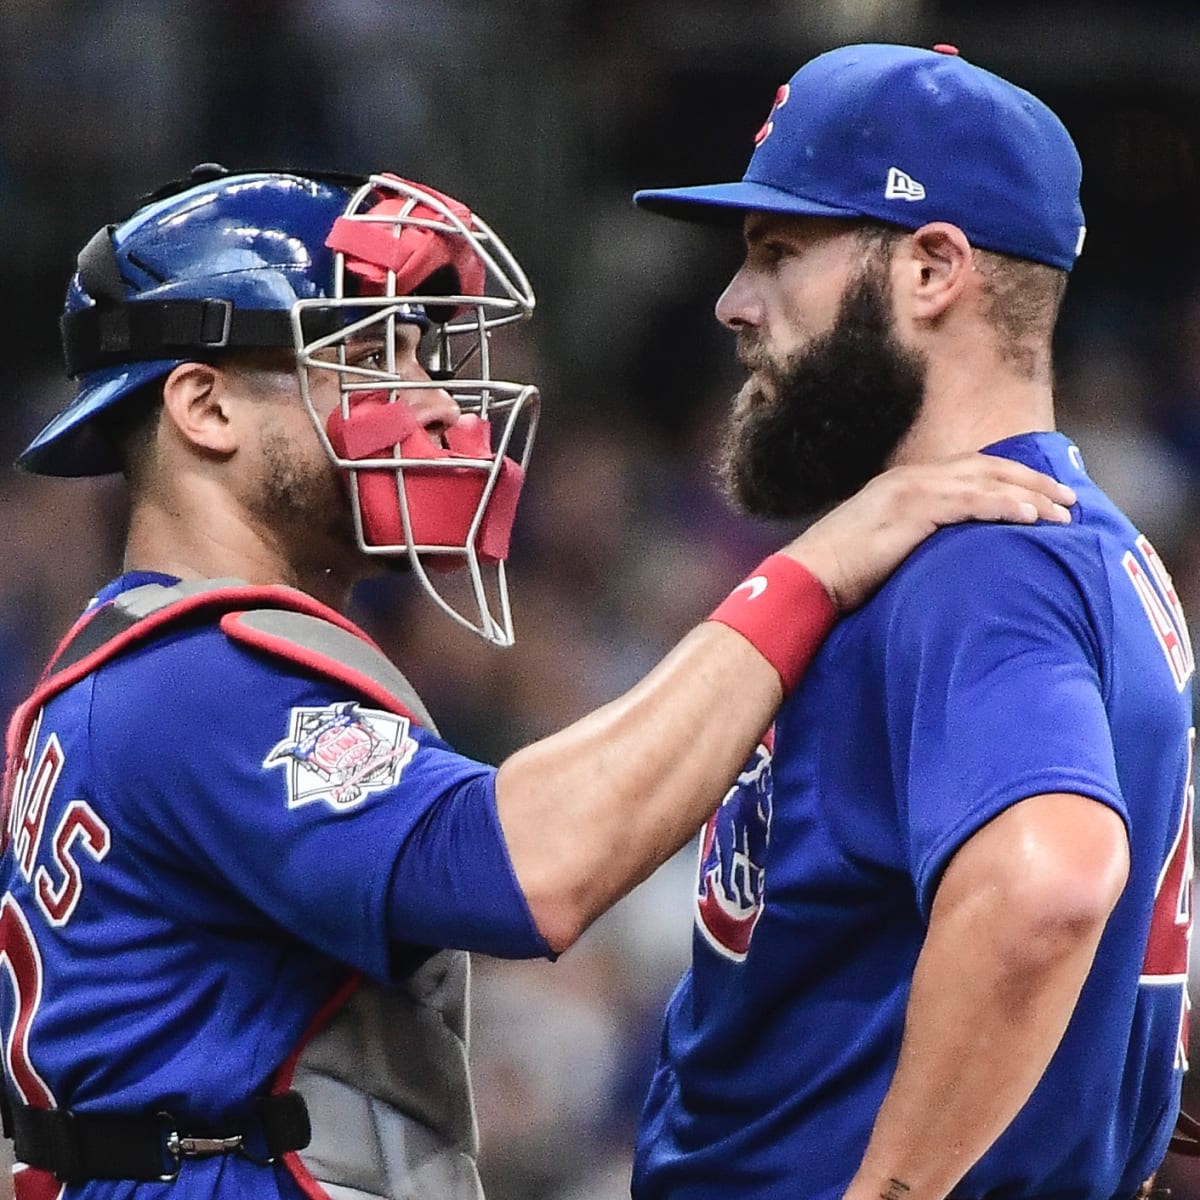 Jake Arrieta off to strong start in second stint with Cubs - Chicago  Sun-Times